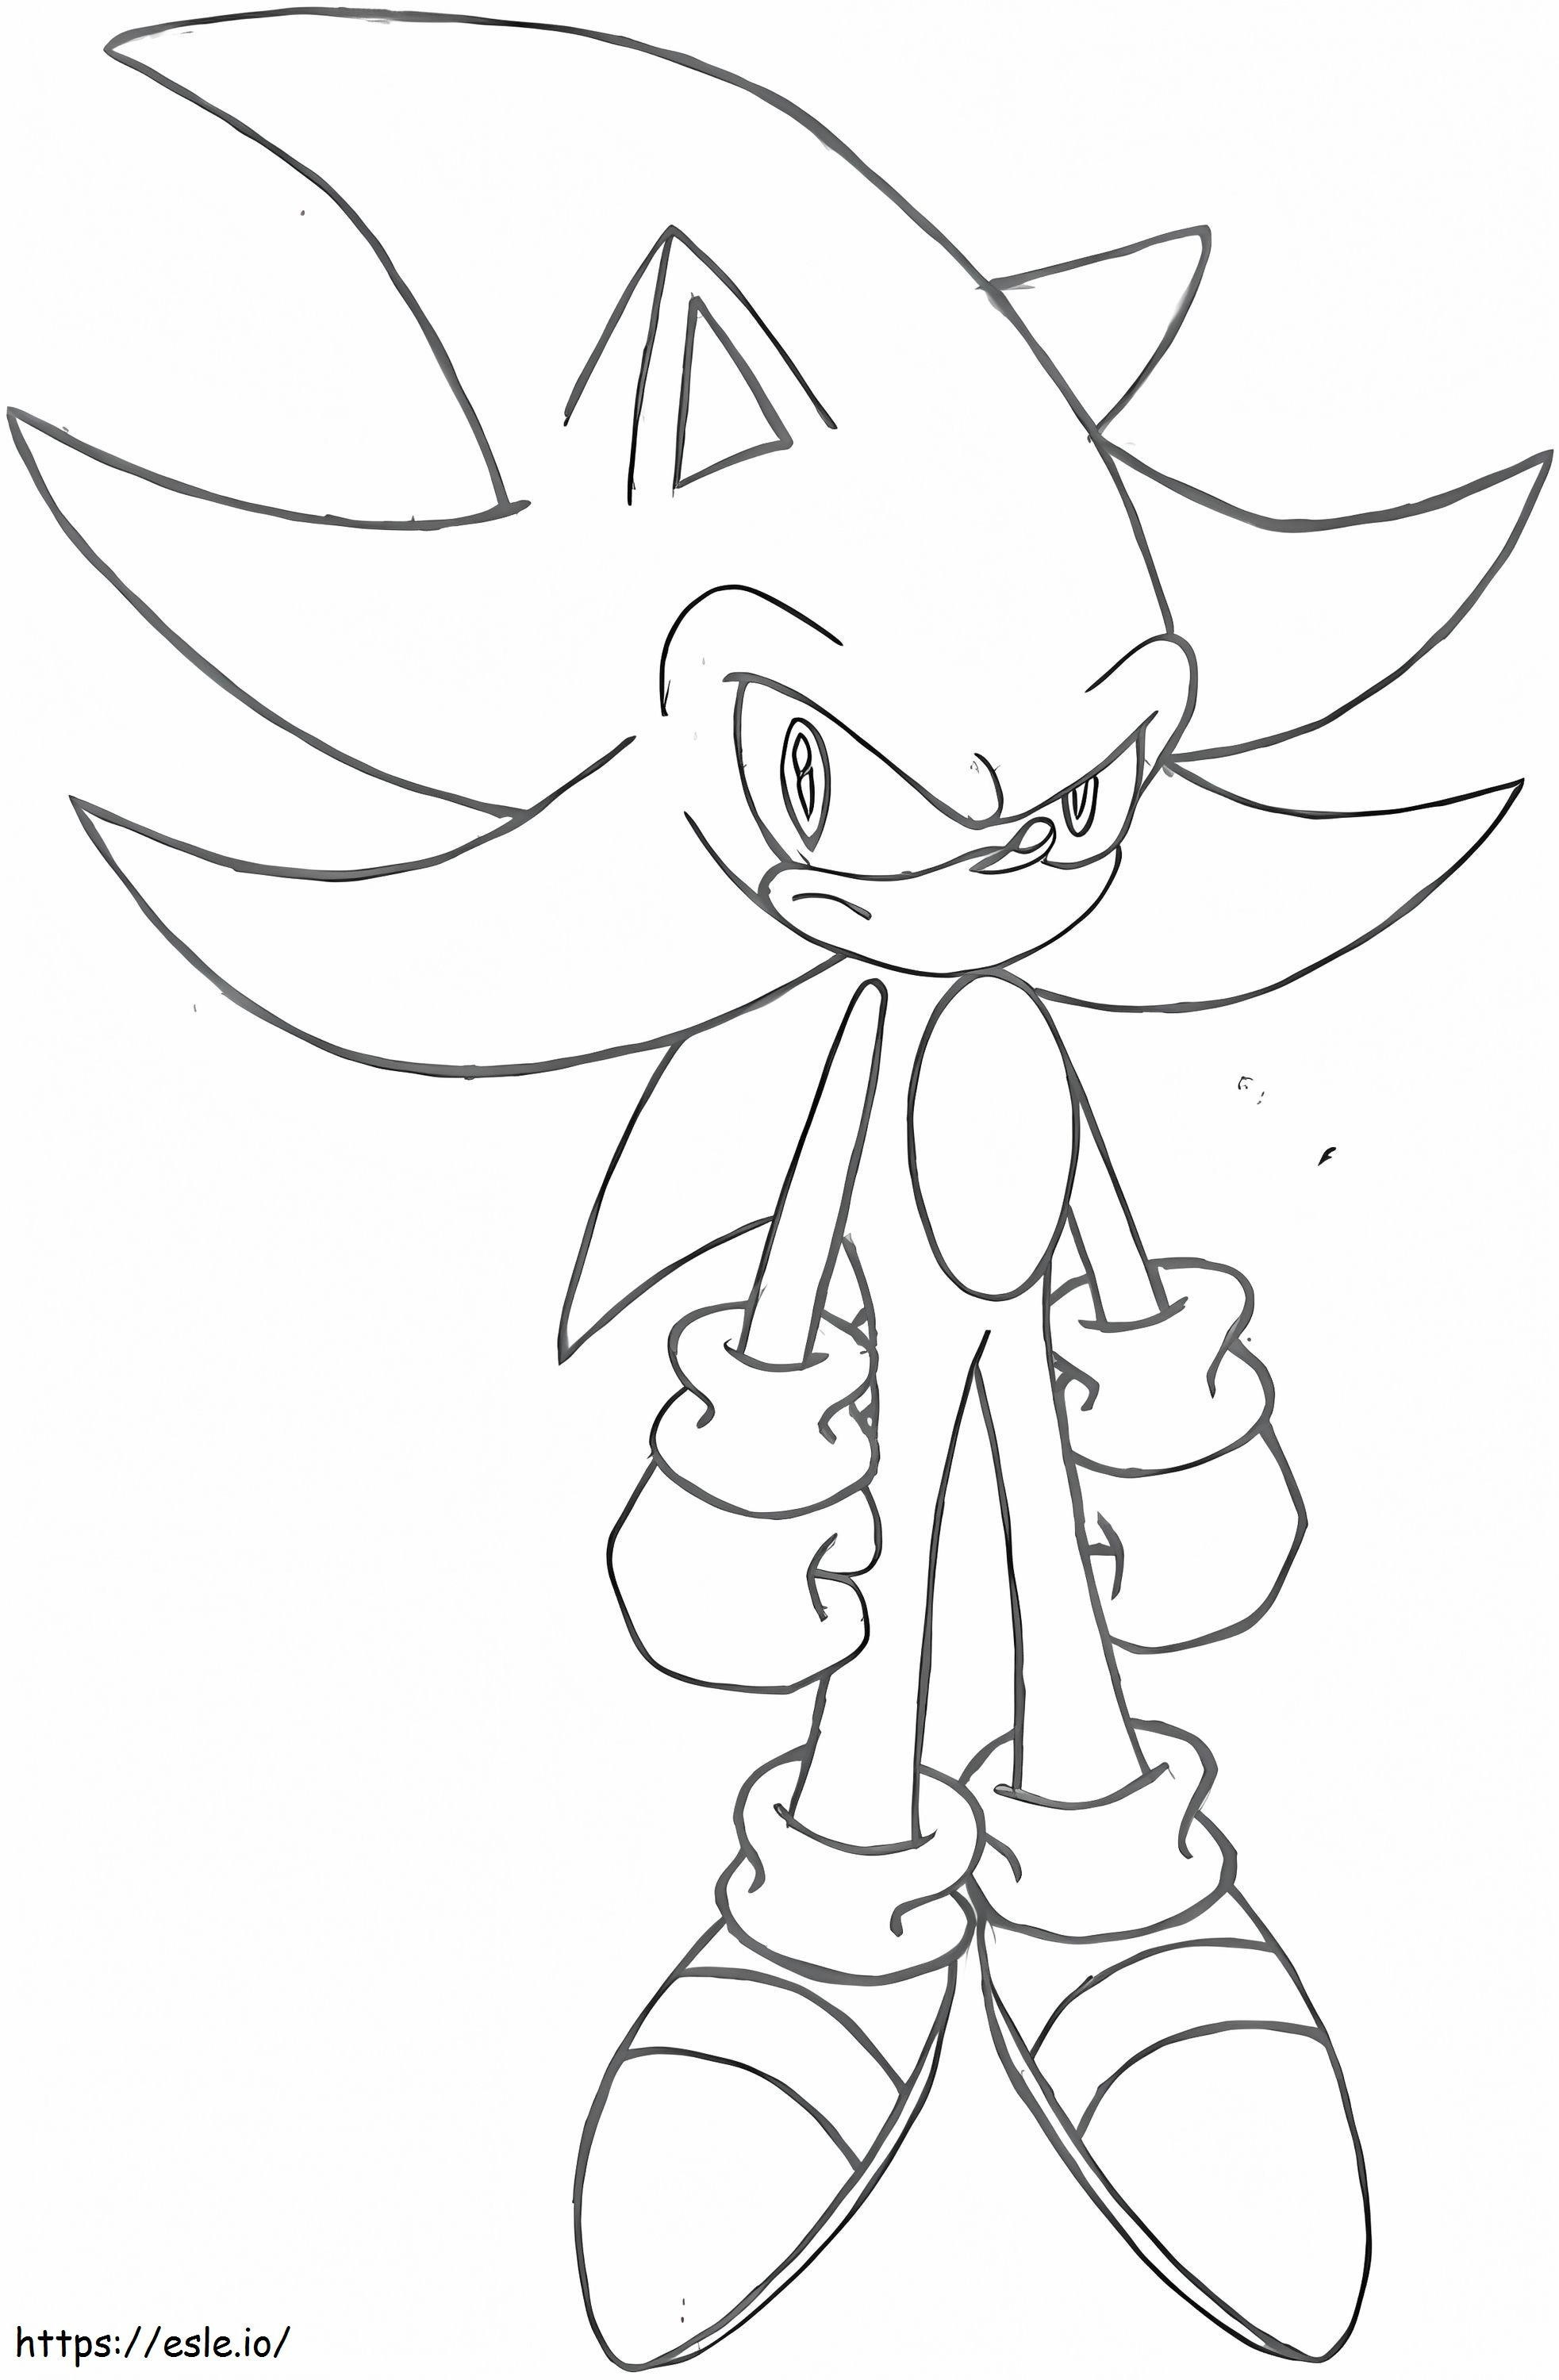 Sonic Is Angry coloring page